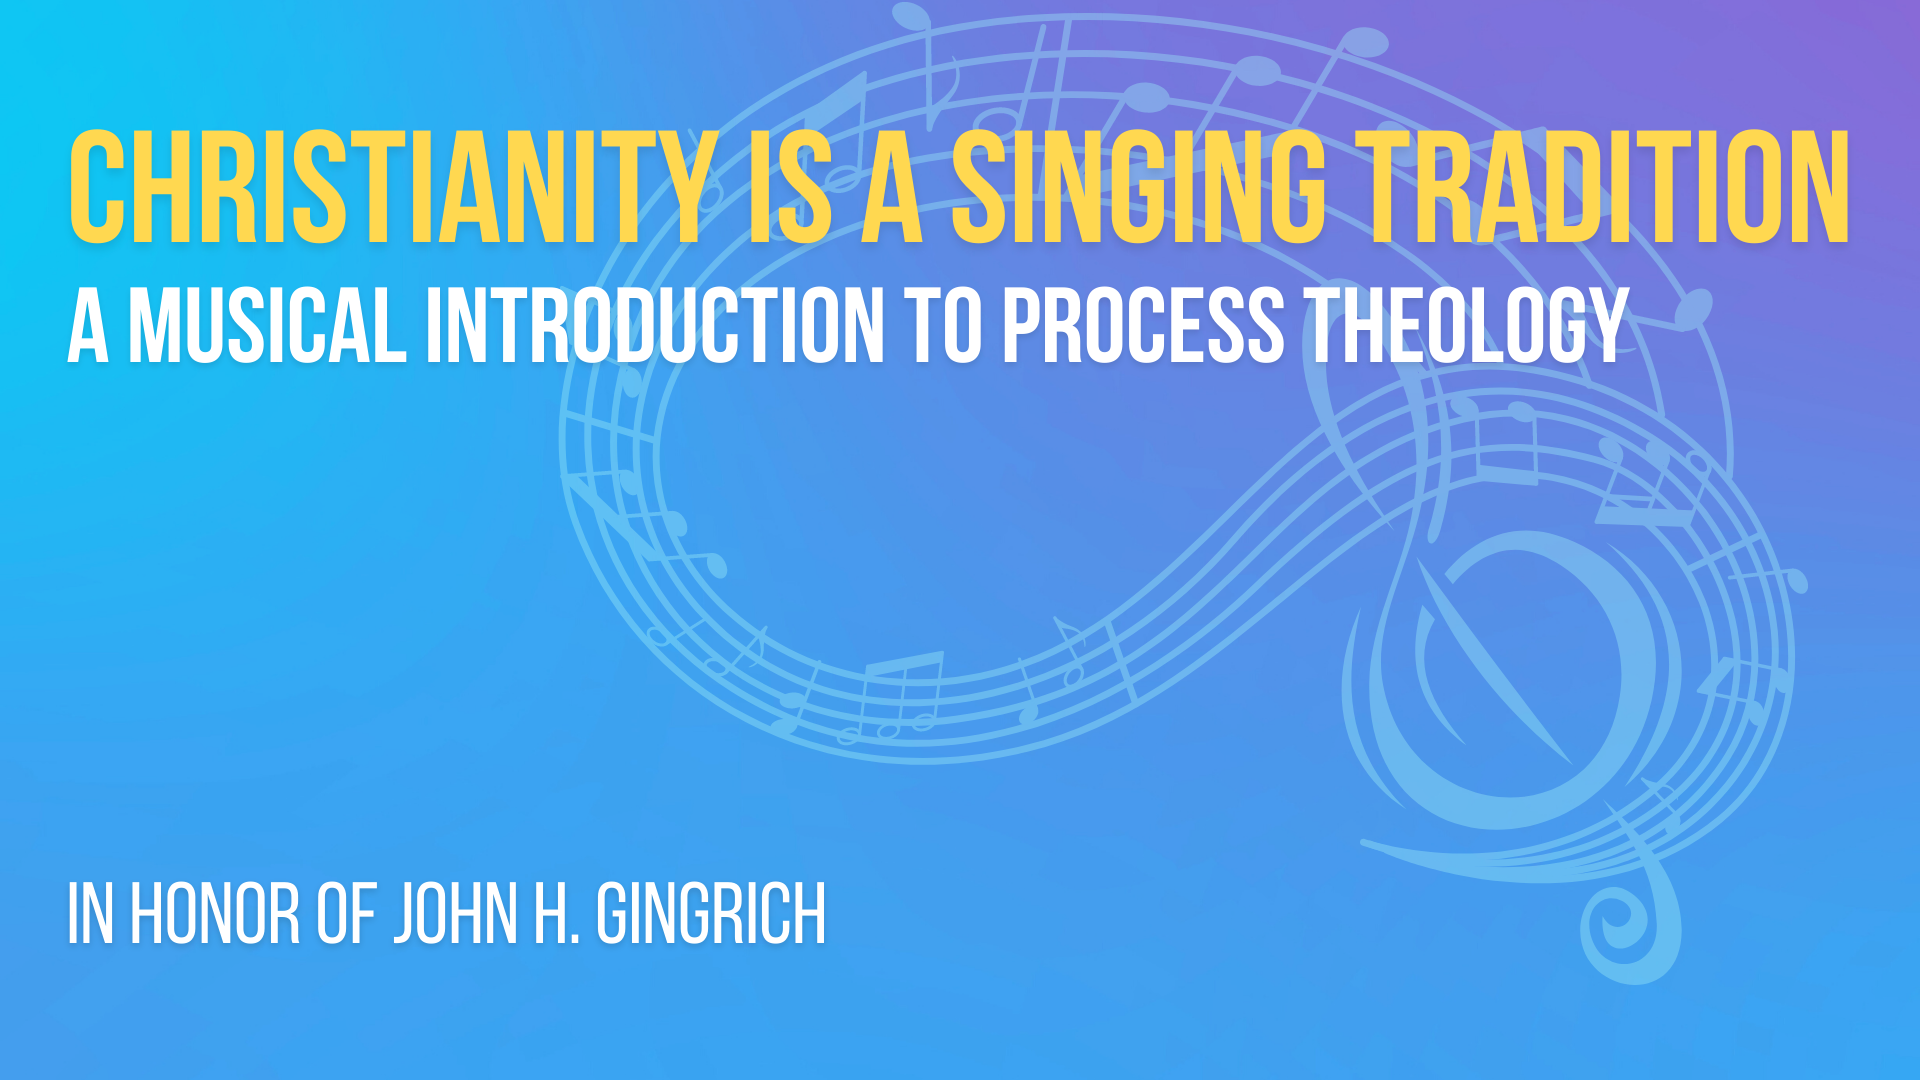 Christianity is a Singing Tradition